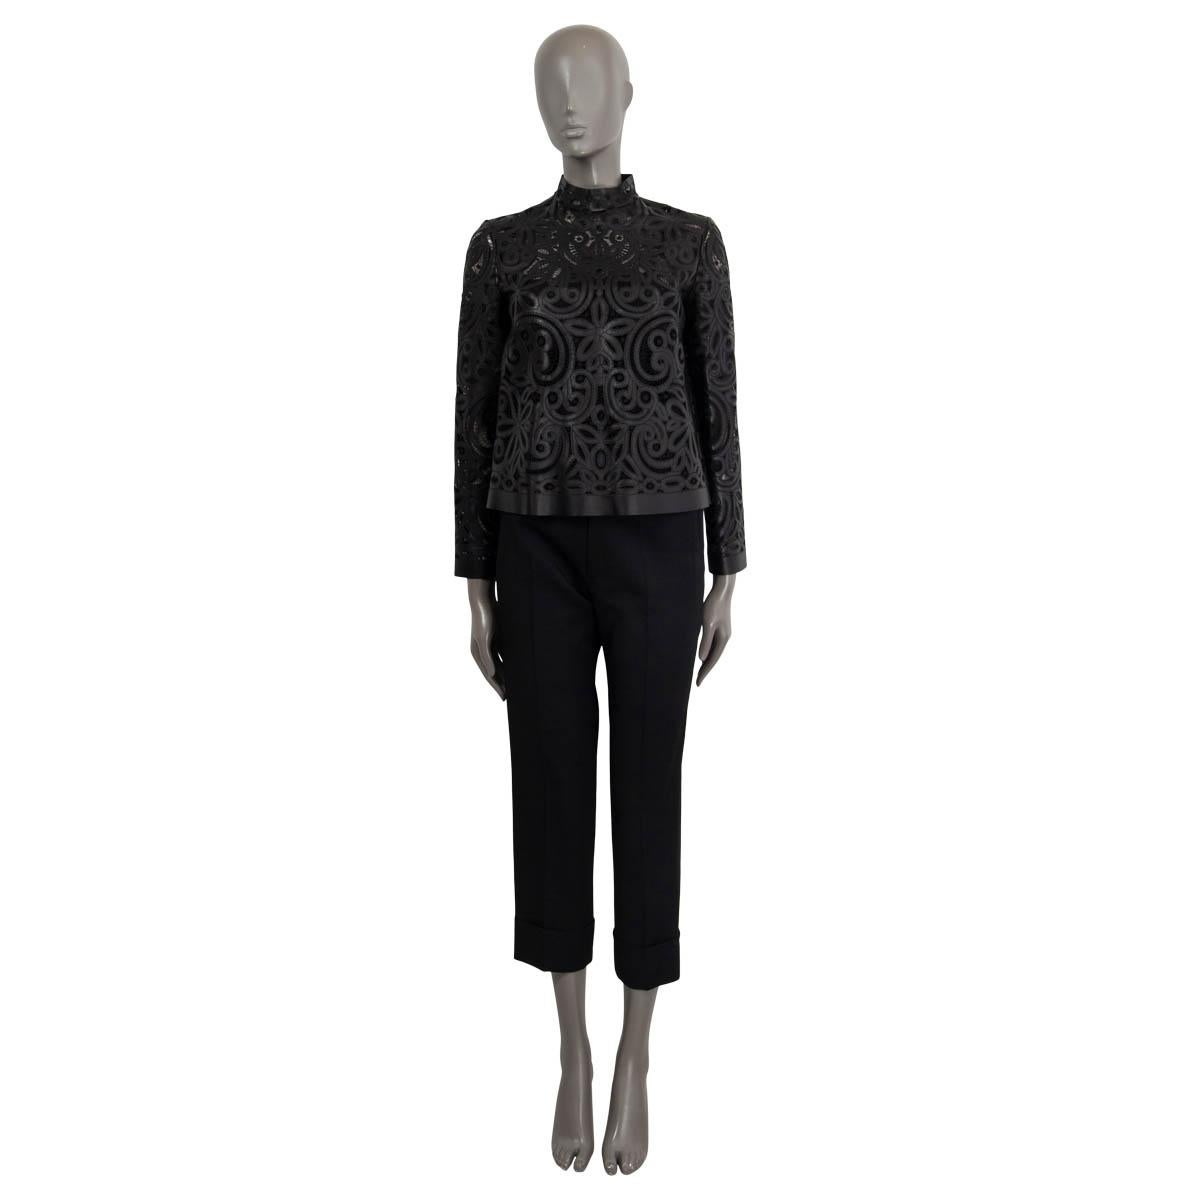 100% authentic Christian Dior laser-cut lace shirt in black lambskin leather (100%). Features a mock neck and a cropped cut. Closed with buttons on the back. Comes with a slip dress in black silk (100%). Has been worn and is in excellent